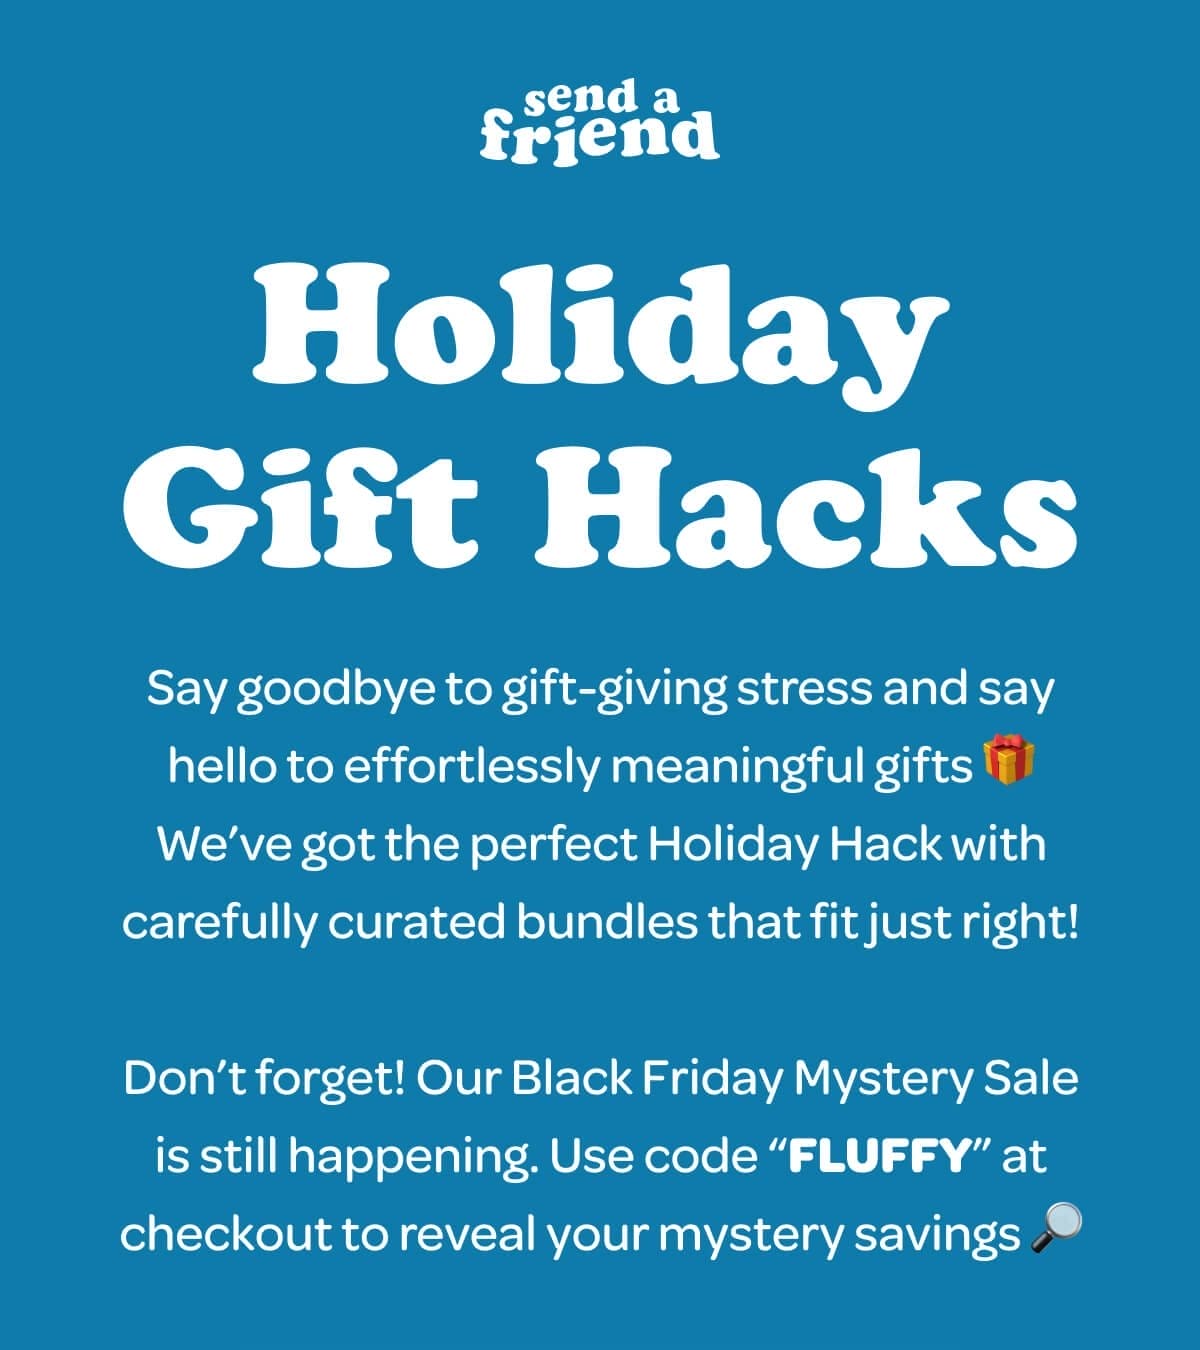 Holiday Gift Hacks. Say goodbye to gift-giving stress and say hello to effortlessly meaningful gifts 🎁We’ve got the perfect Holiday Hack with carefully curated bundles that fit just right! Don’t forget! Our Black Friday Mystery Sale is still happening. Use code “FLUFFY” at checkout to reveal your mystery savings 🔎